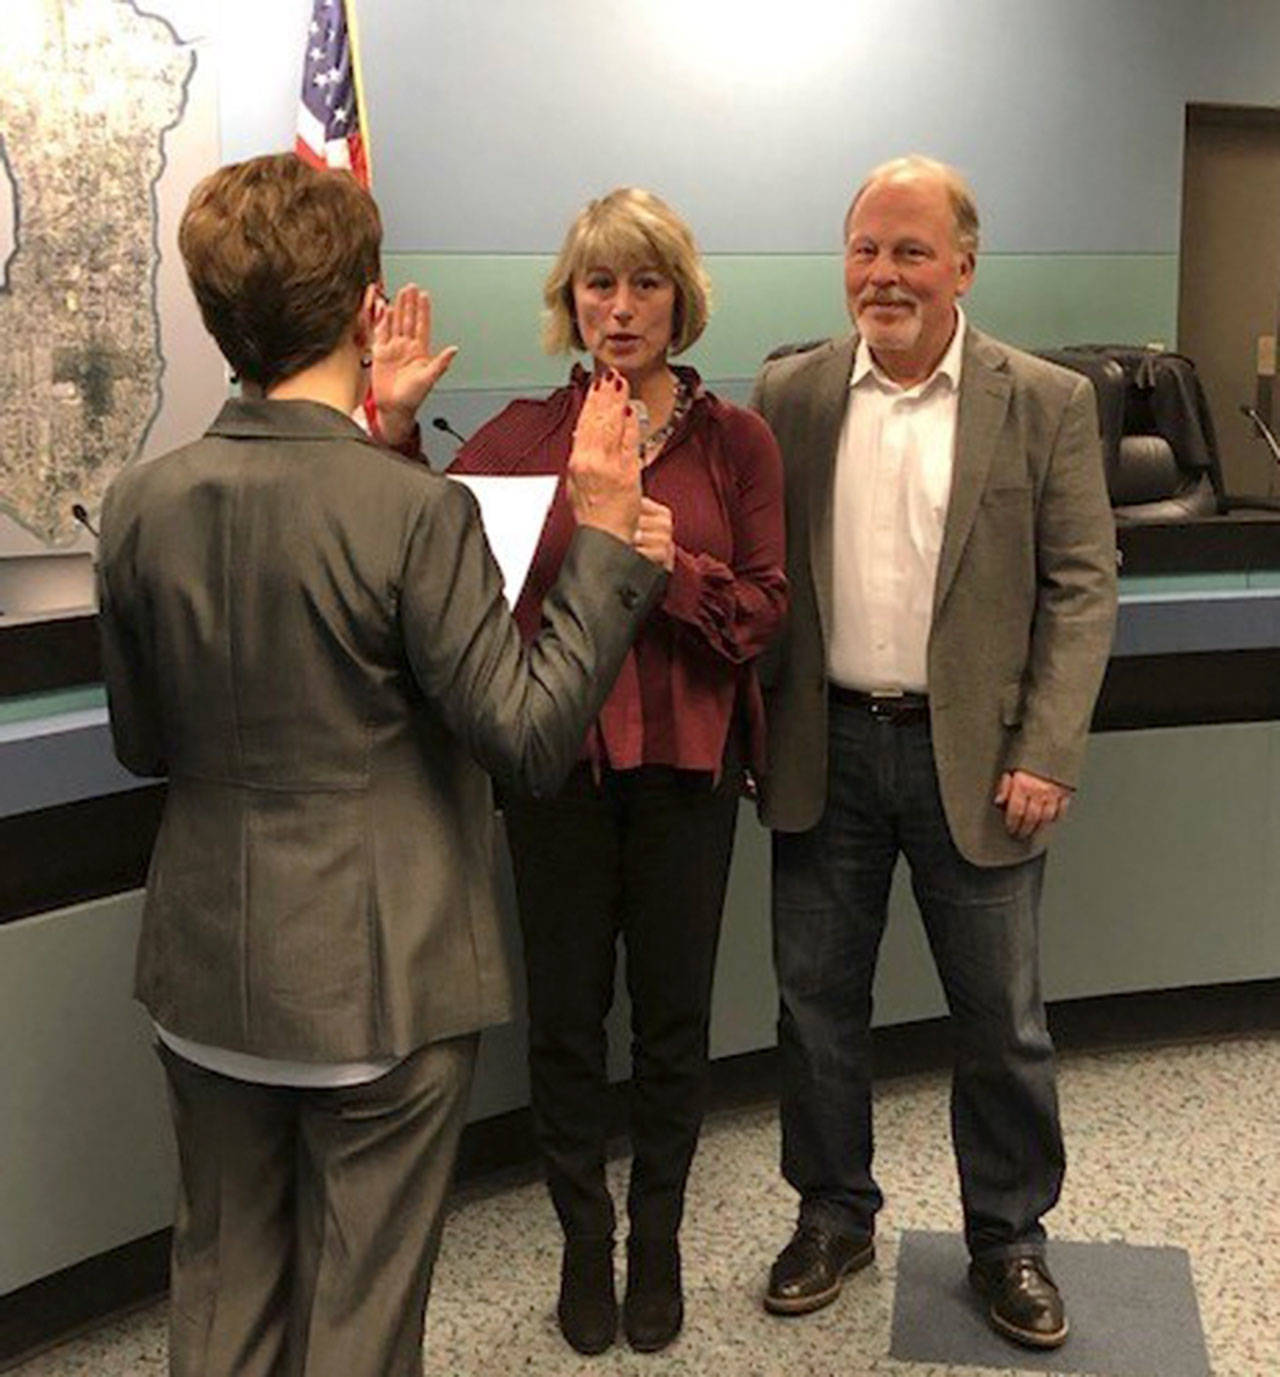 Lisa Anderl is sworn into the Mercer Island City Council. Anderl replaces former Councilmember Tom Acker who resigned last year. Photo courtesy of the city of Mercer Island